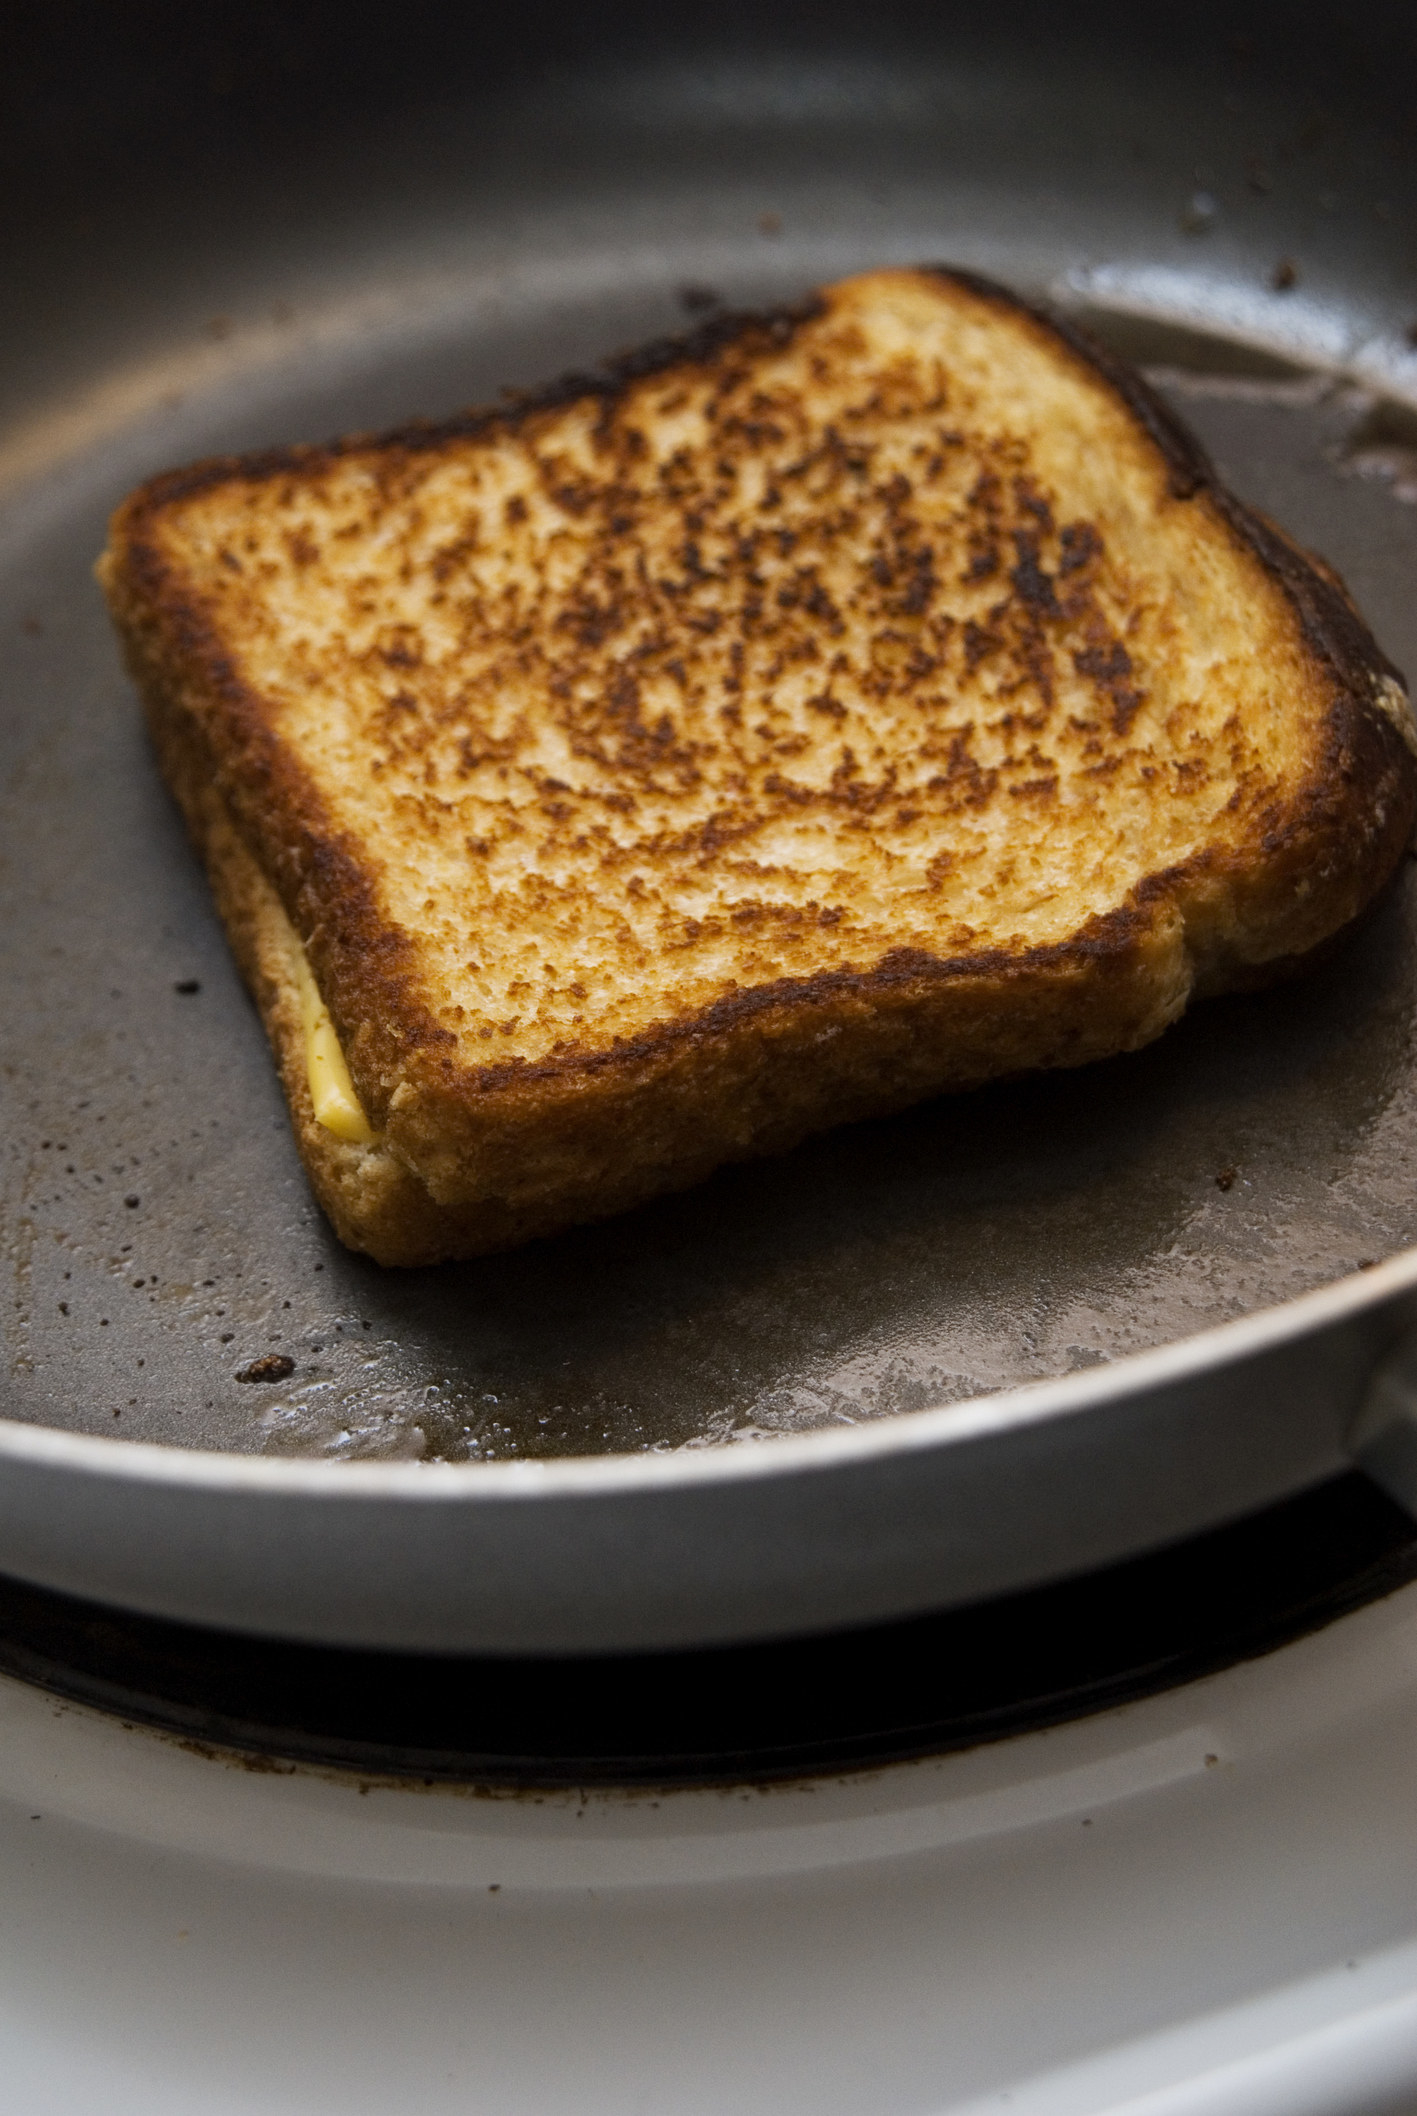 A crispy grilled cheese sandwich in frying pan on stove.